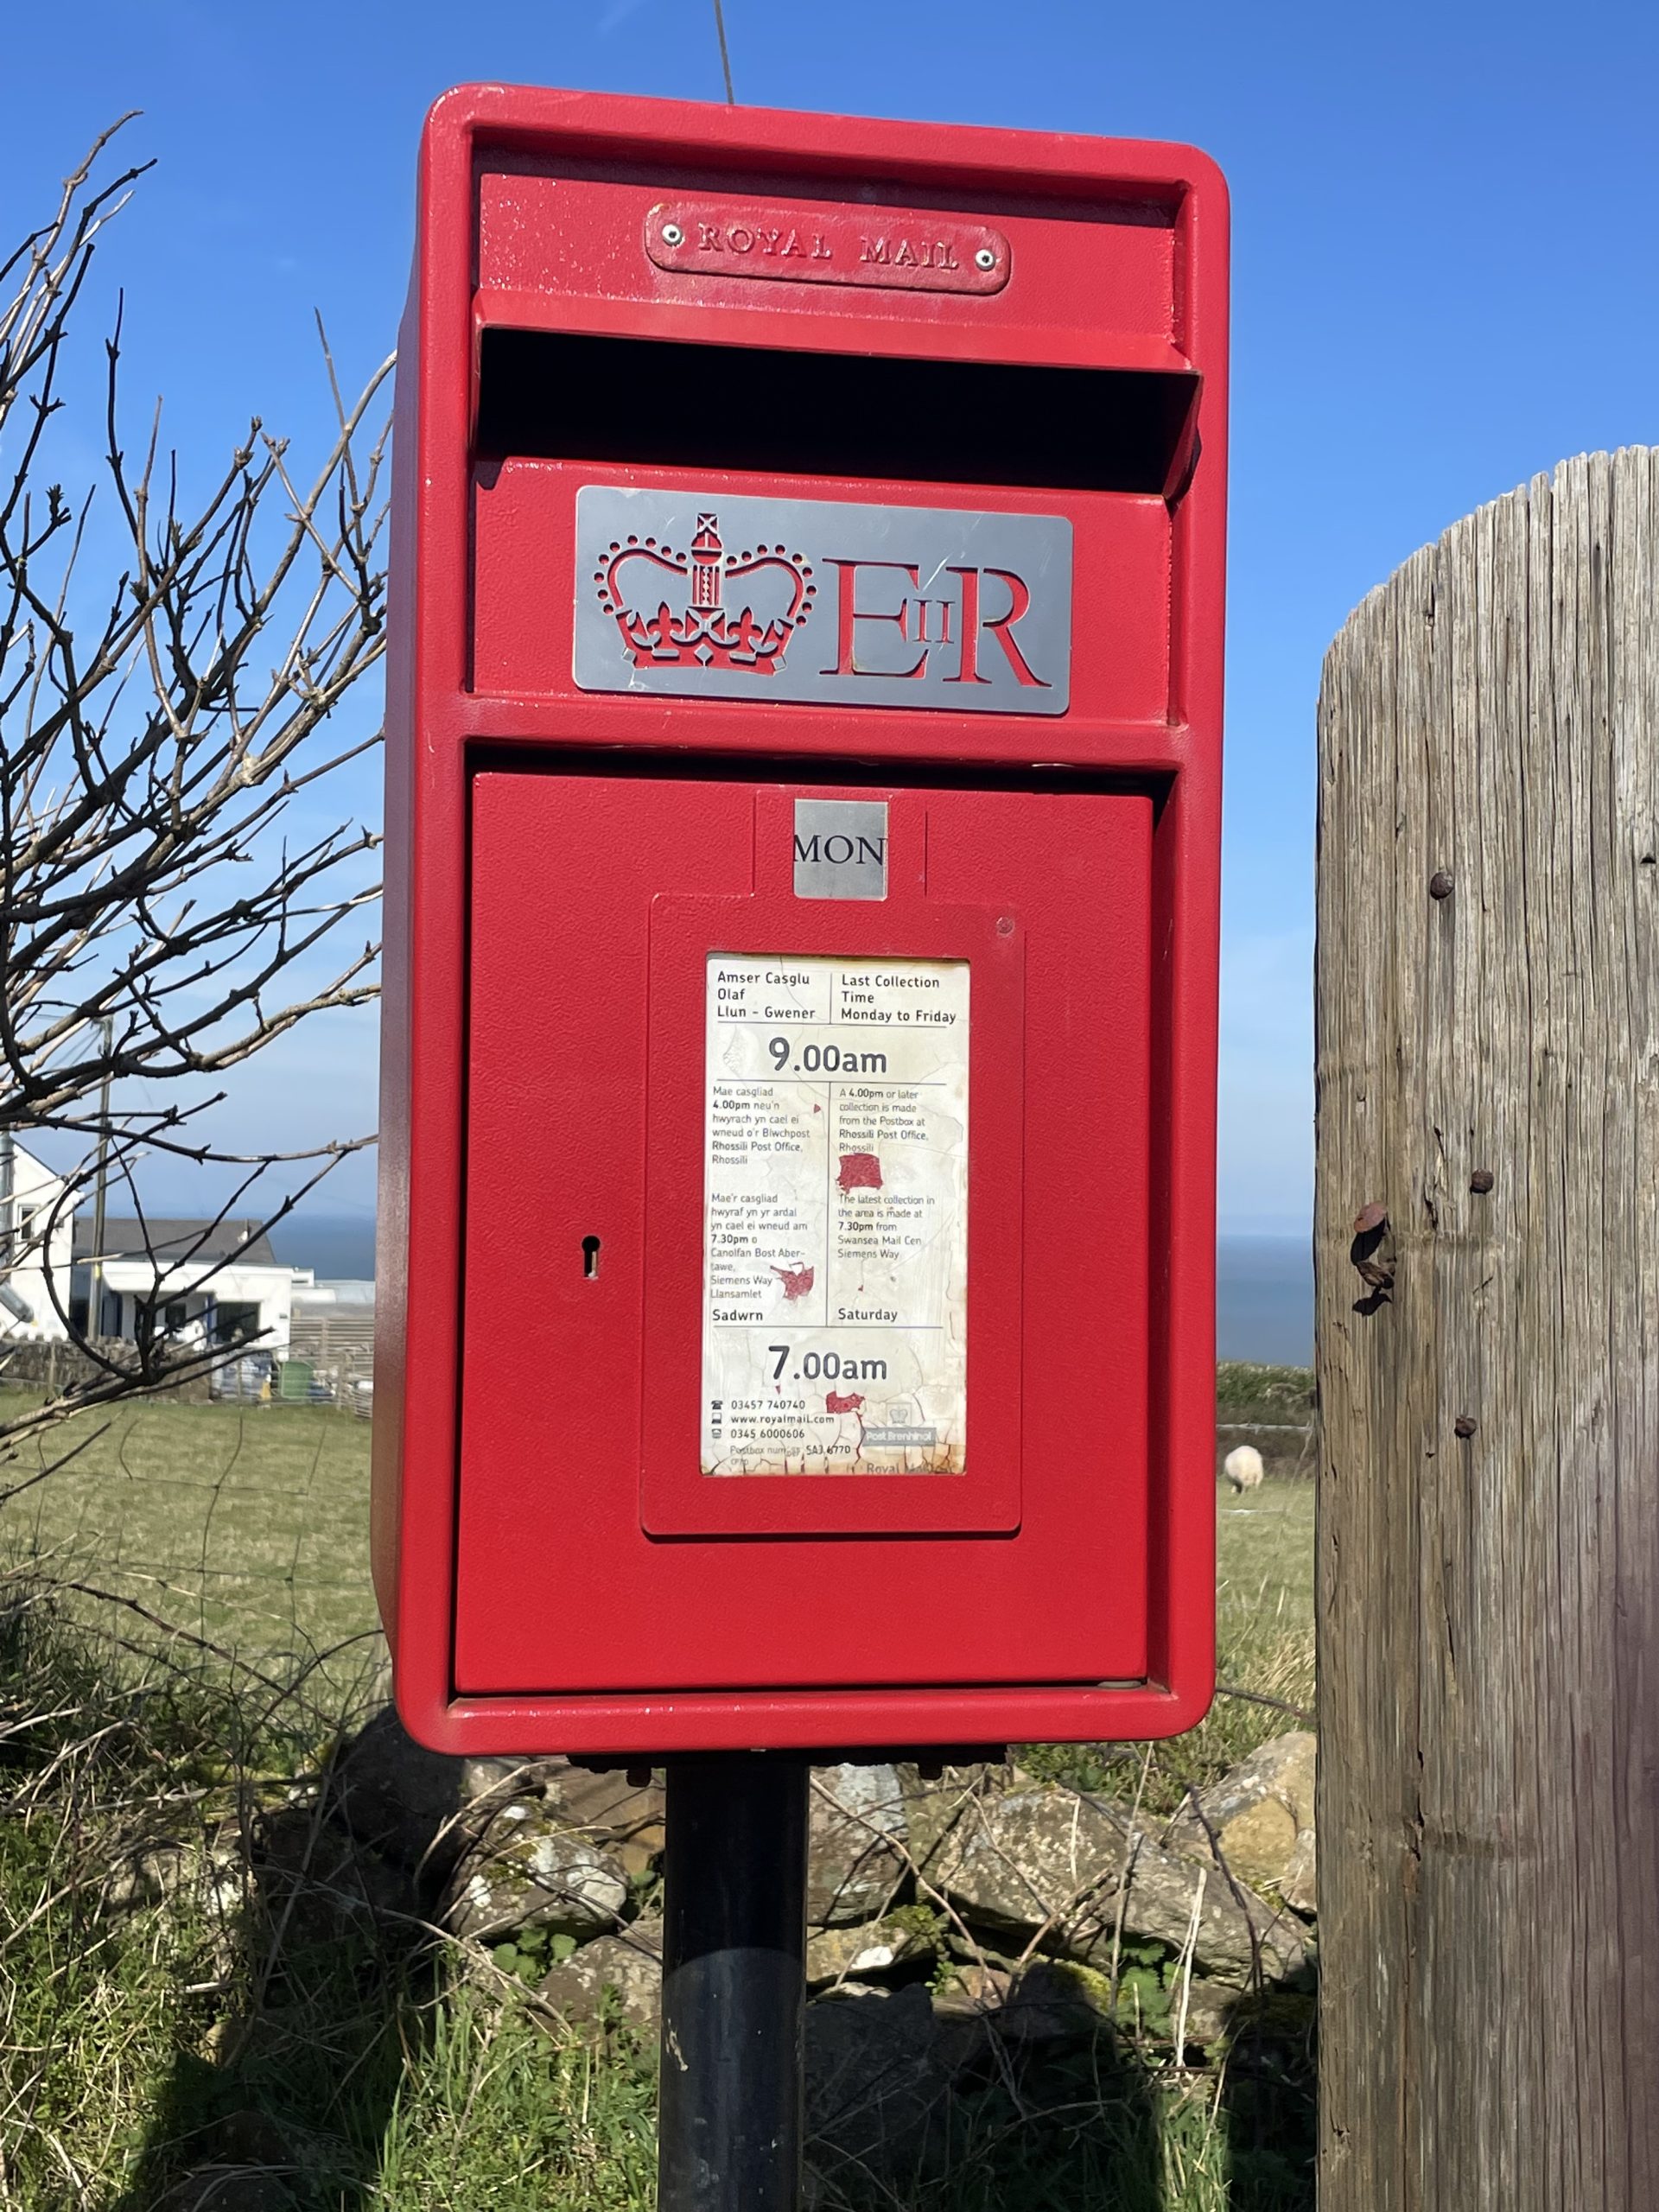 The postbox in Rhossili